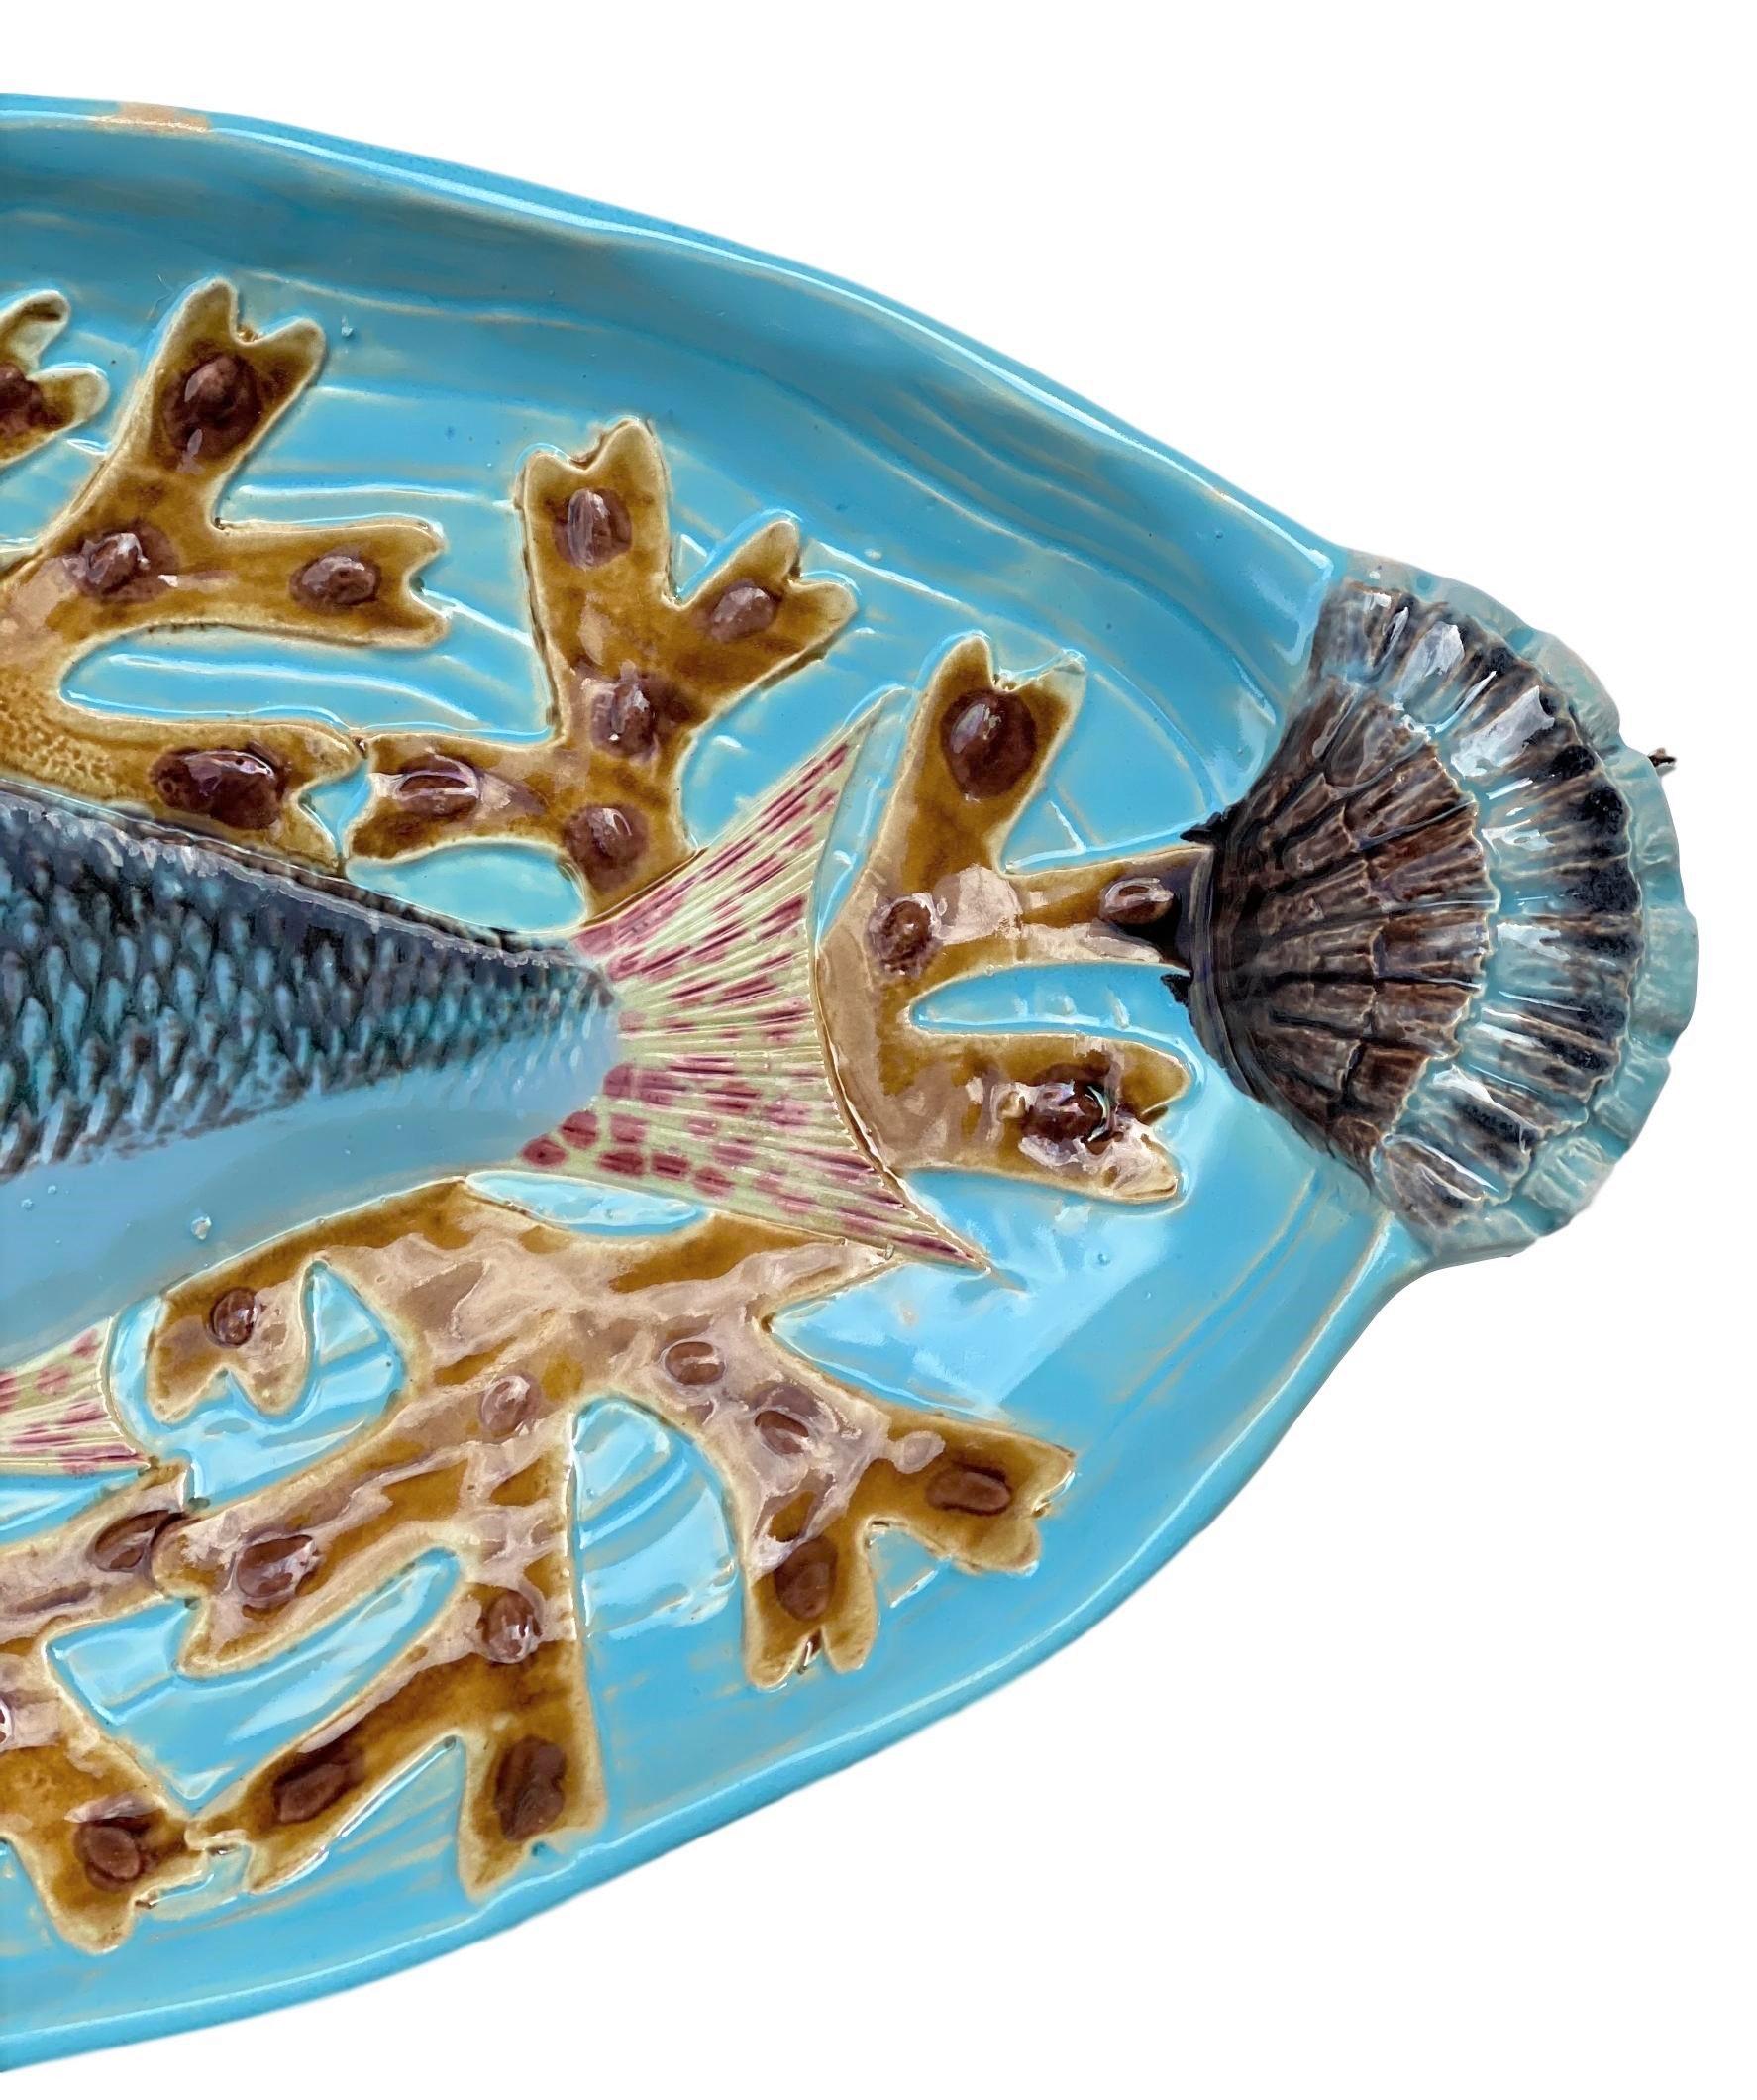 Holdcroft Majolica 7-piece salmon service, English, circa 1875, including a platter, naturalistically molded as a salmon on a bed of seaweeds; on a molded ground simulating moving water, glazed in turquoise blue, with shell form handles molded in